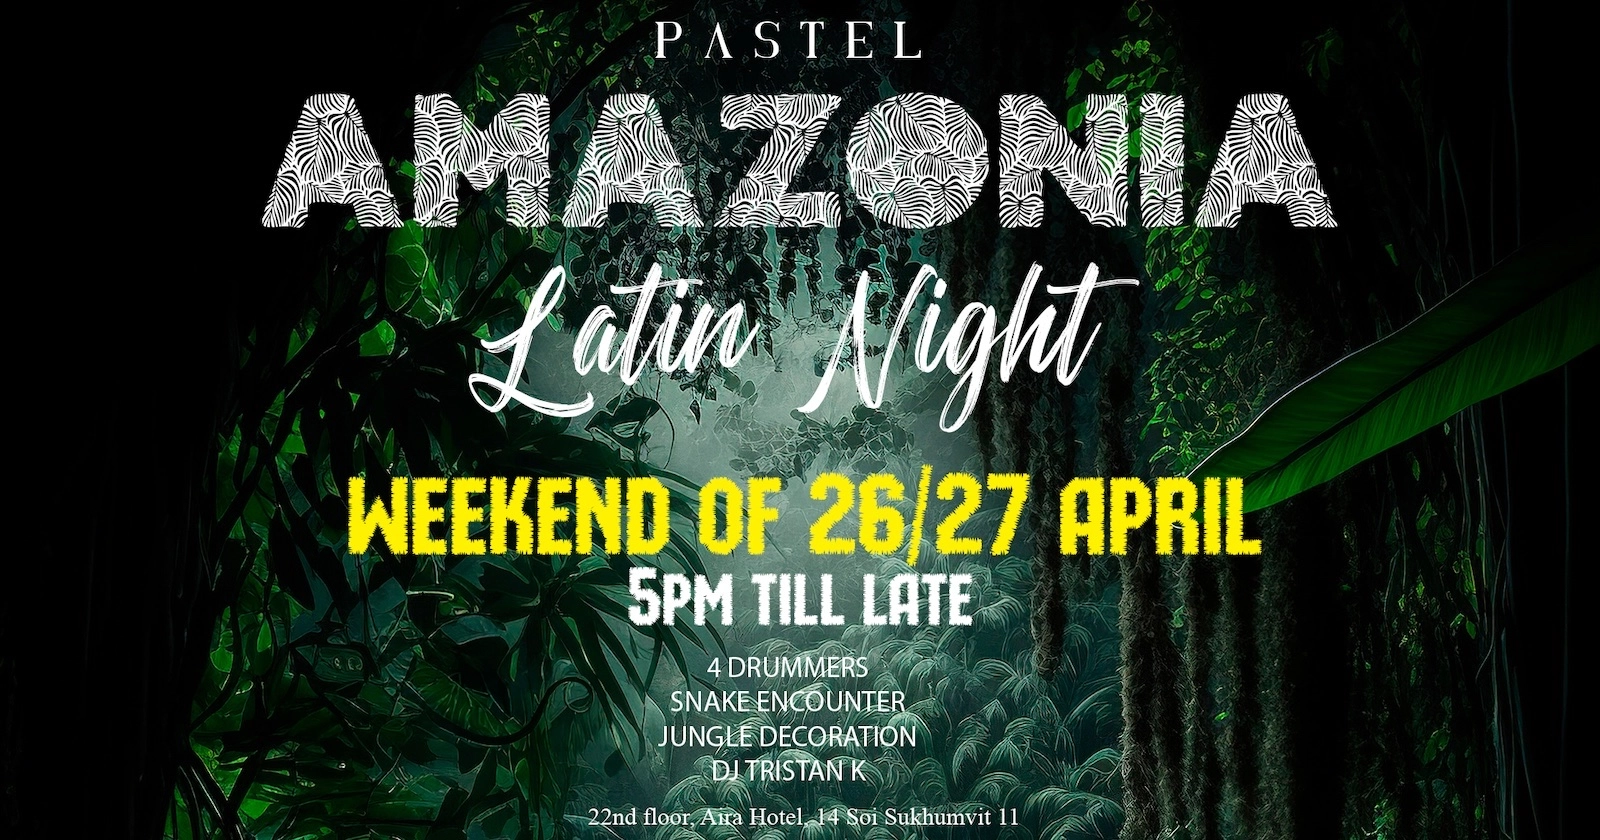 Promo banner for Amazonia party on 26 and 27 April 2024 at Pastel Bangkok rooftop bar in Sukhumvit Soi 11